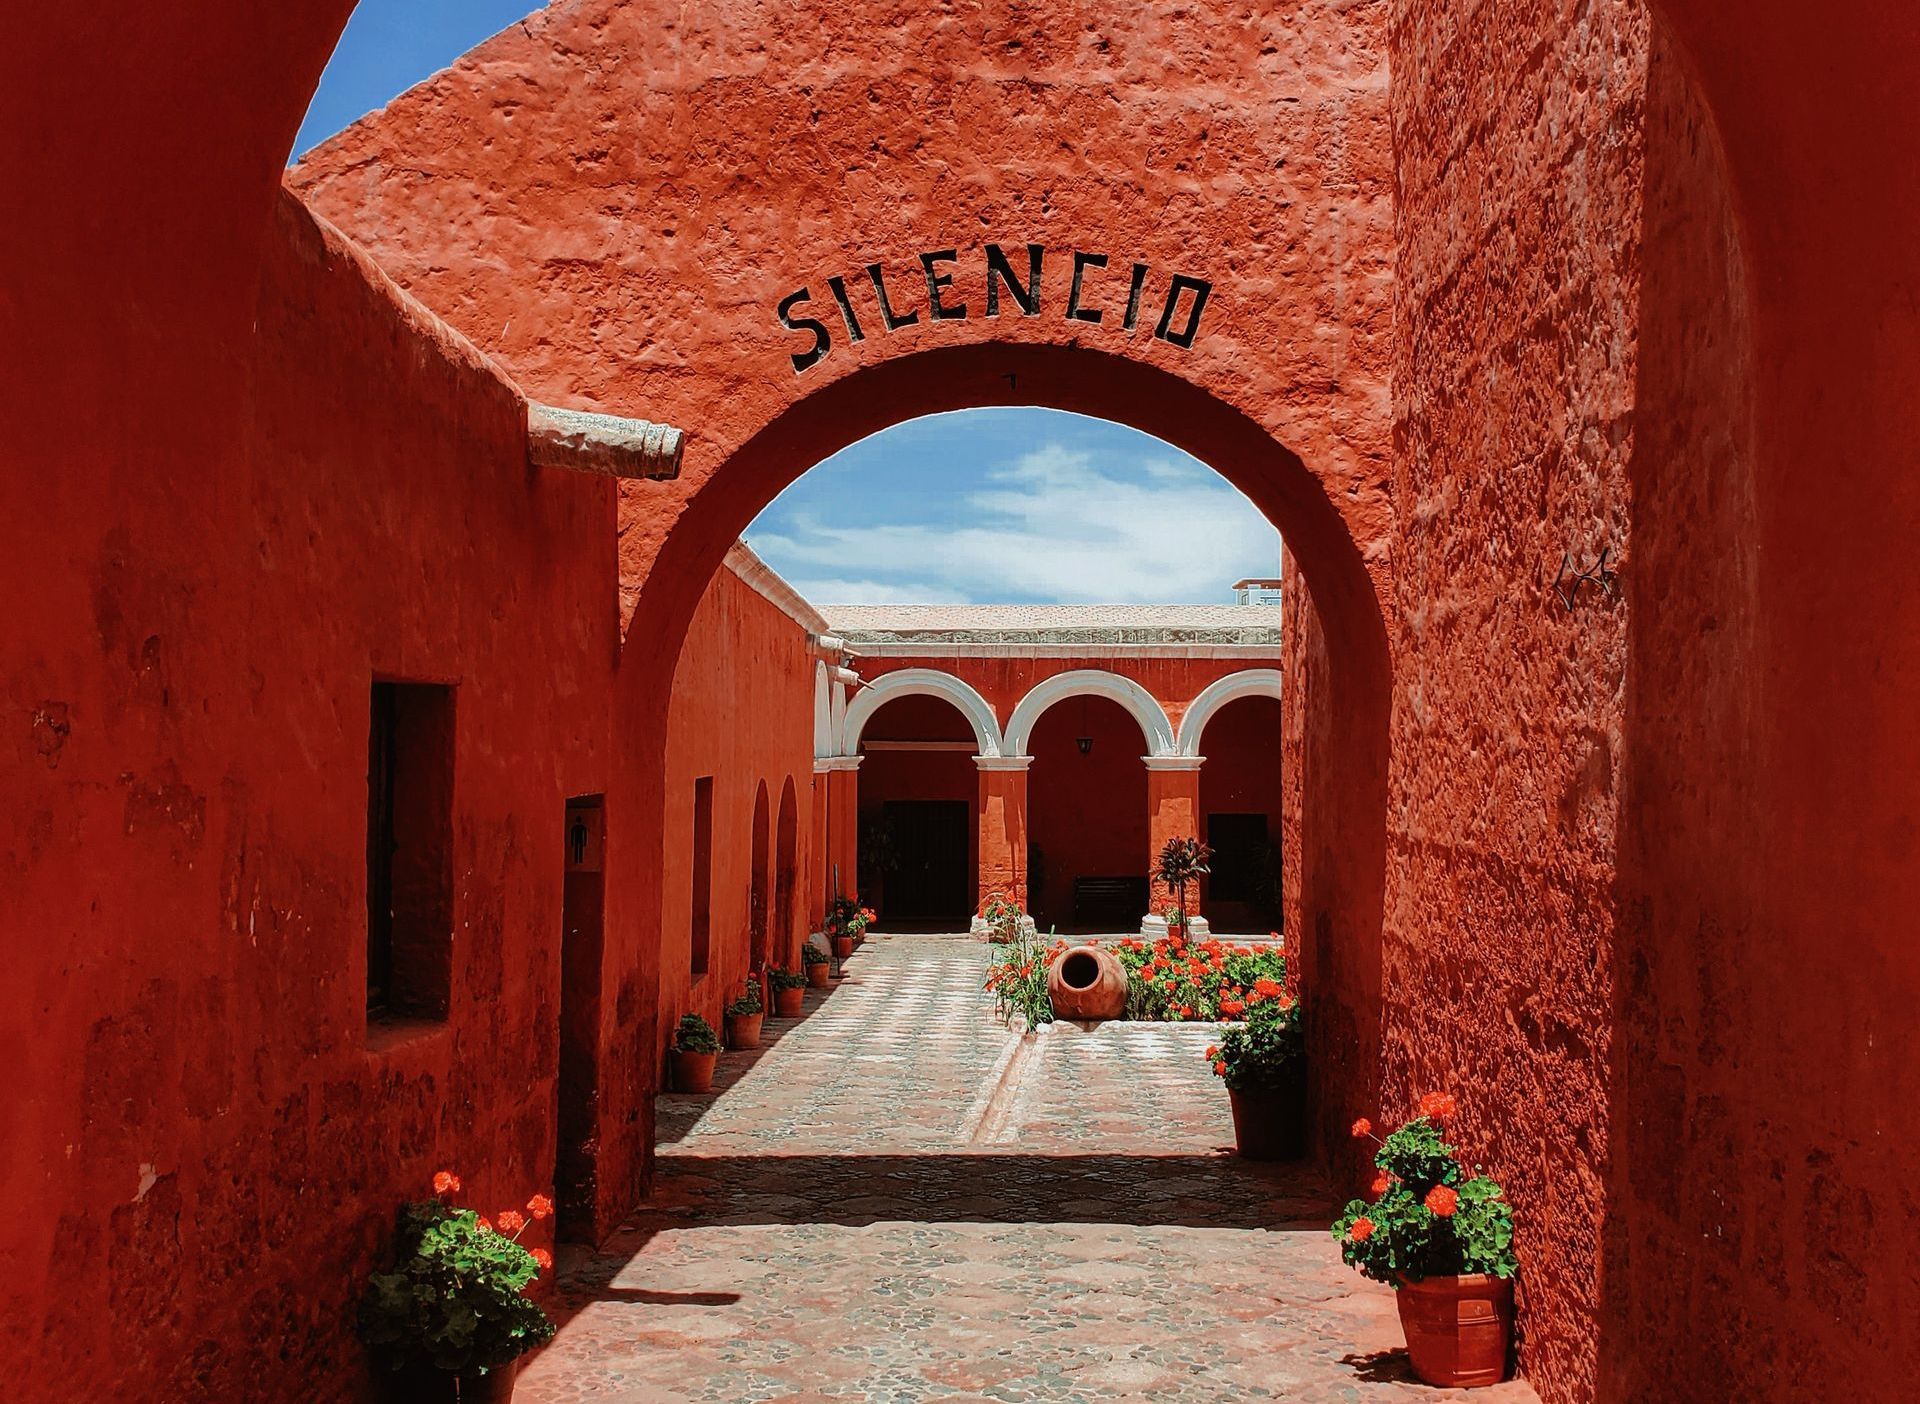 Old world architecture with the word silencio